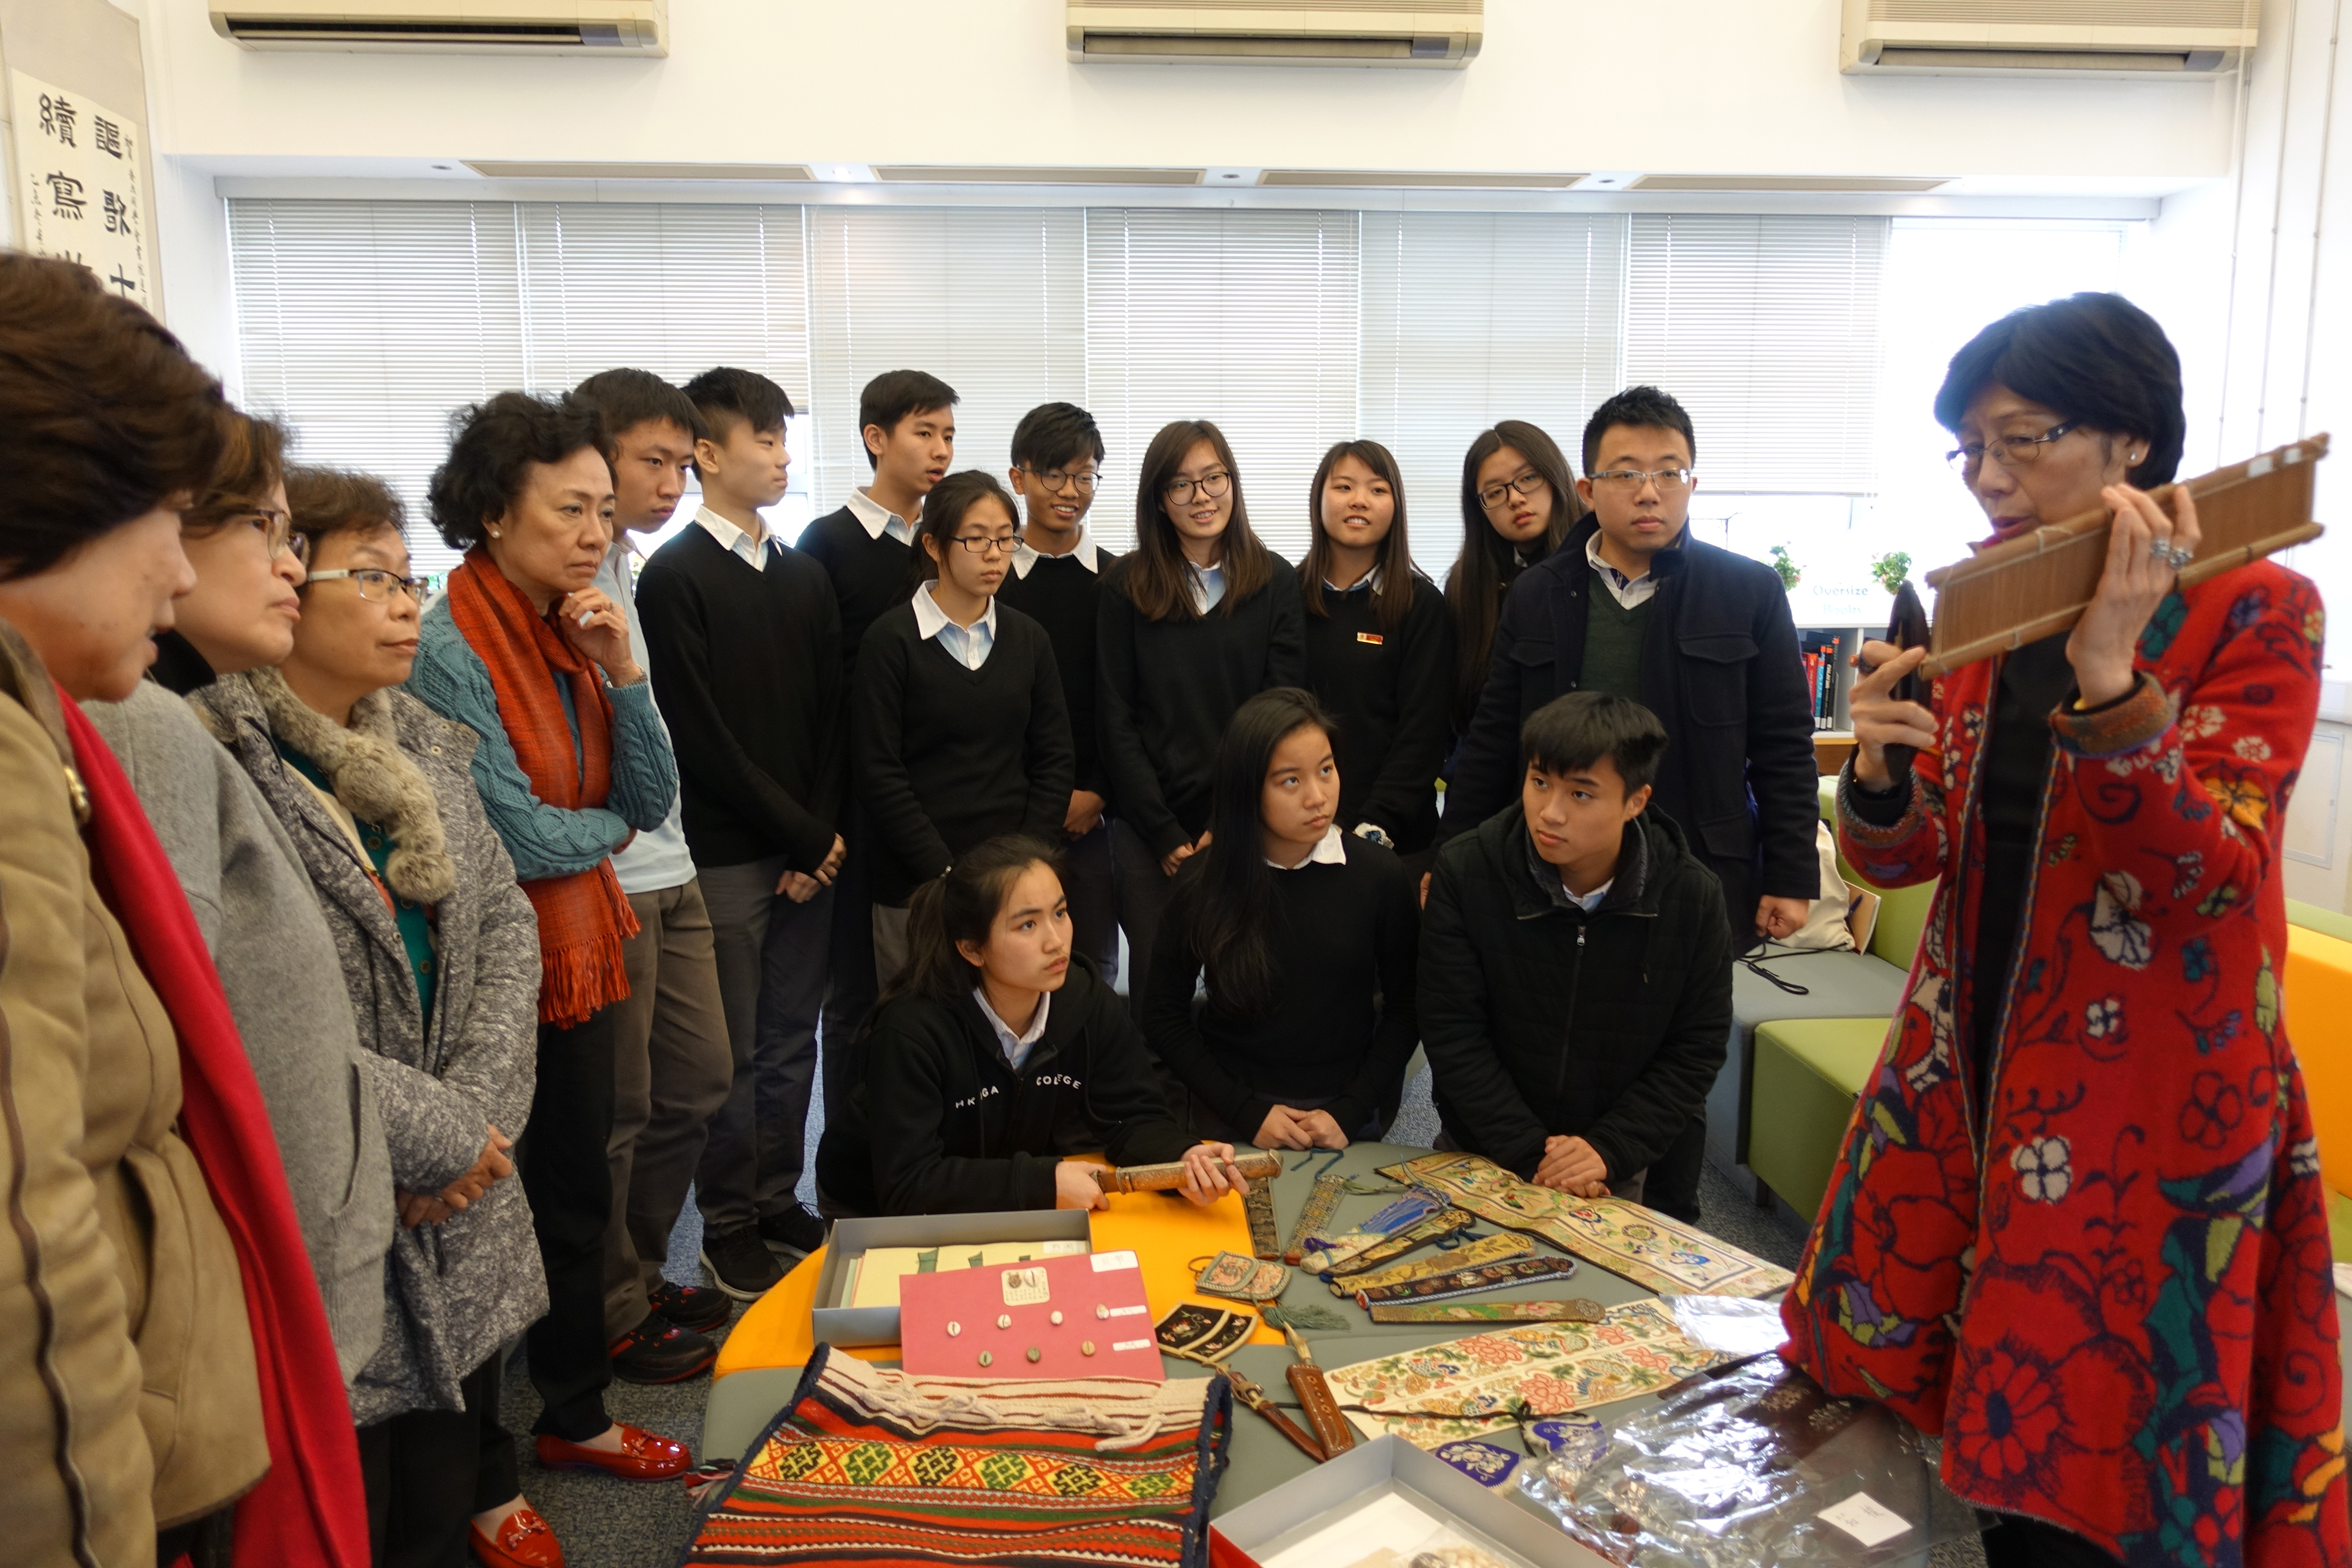 Ms. Lee Mei Yin introducing the exhibits to students